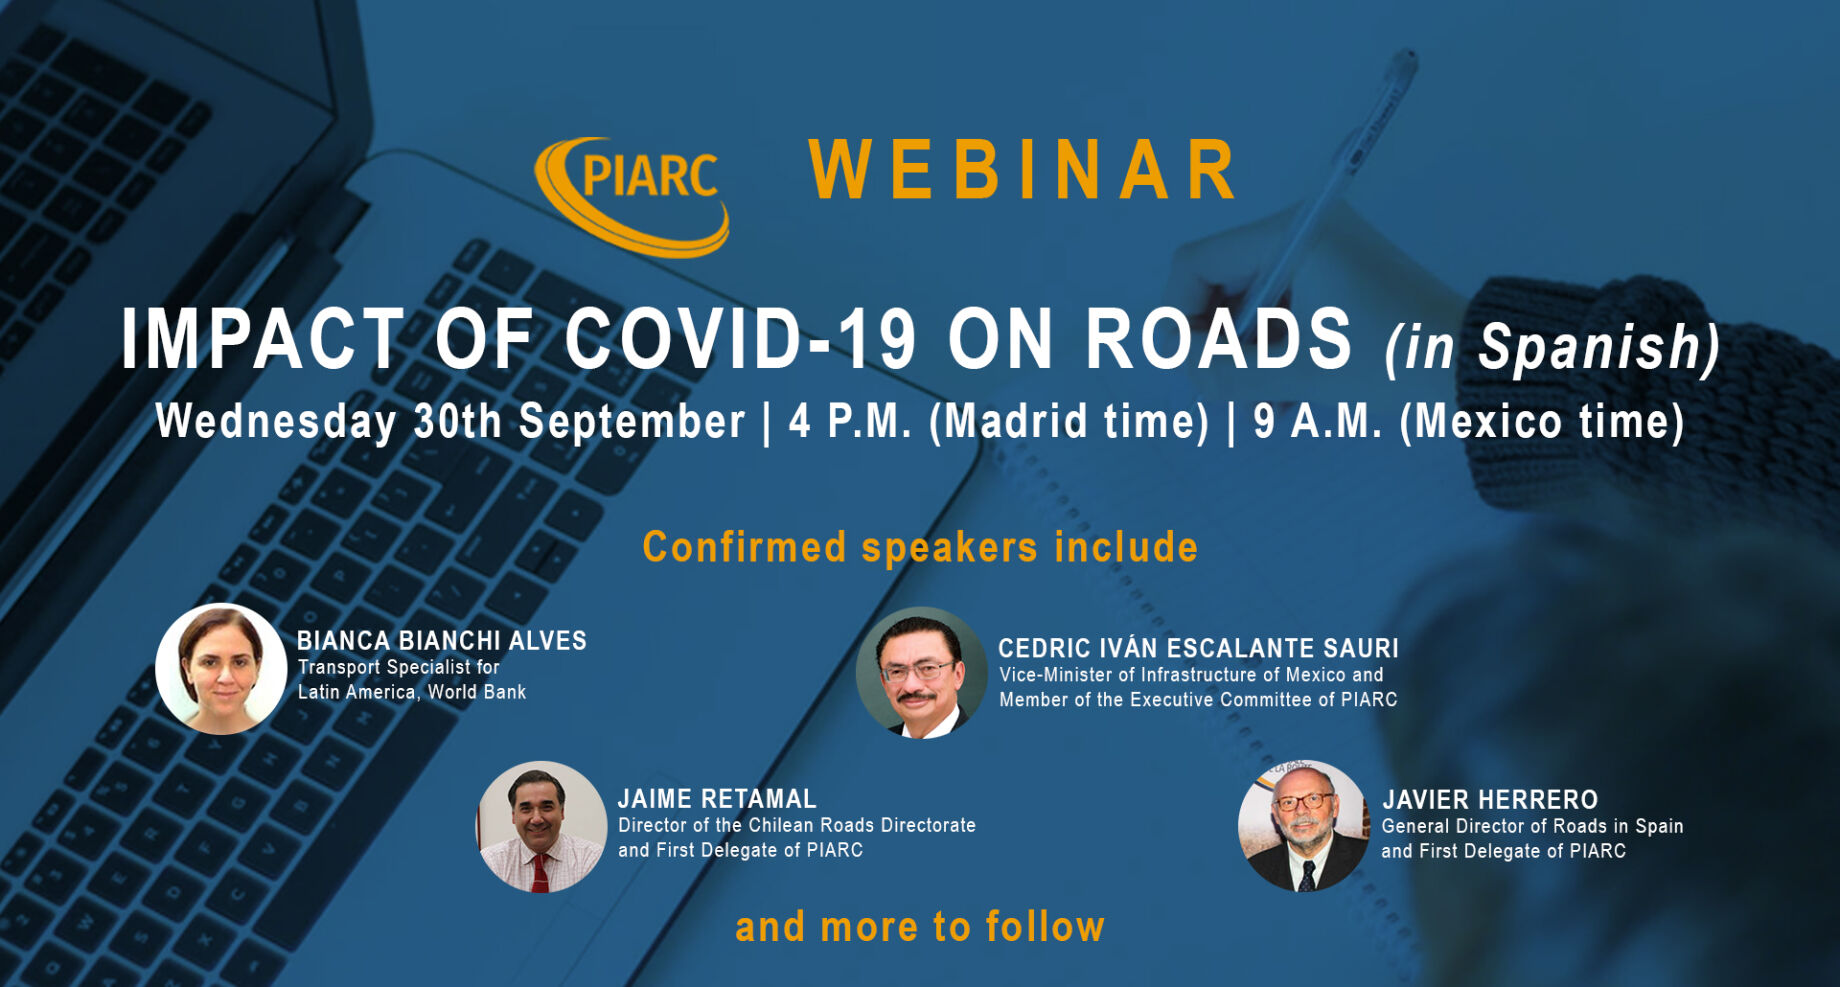 Learn more about the impact of COVID-19 on roads during our upcoming webinar in Spanish!